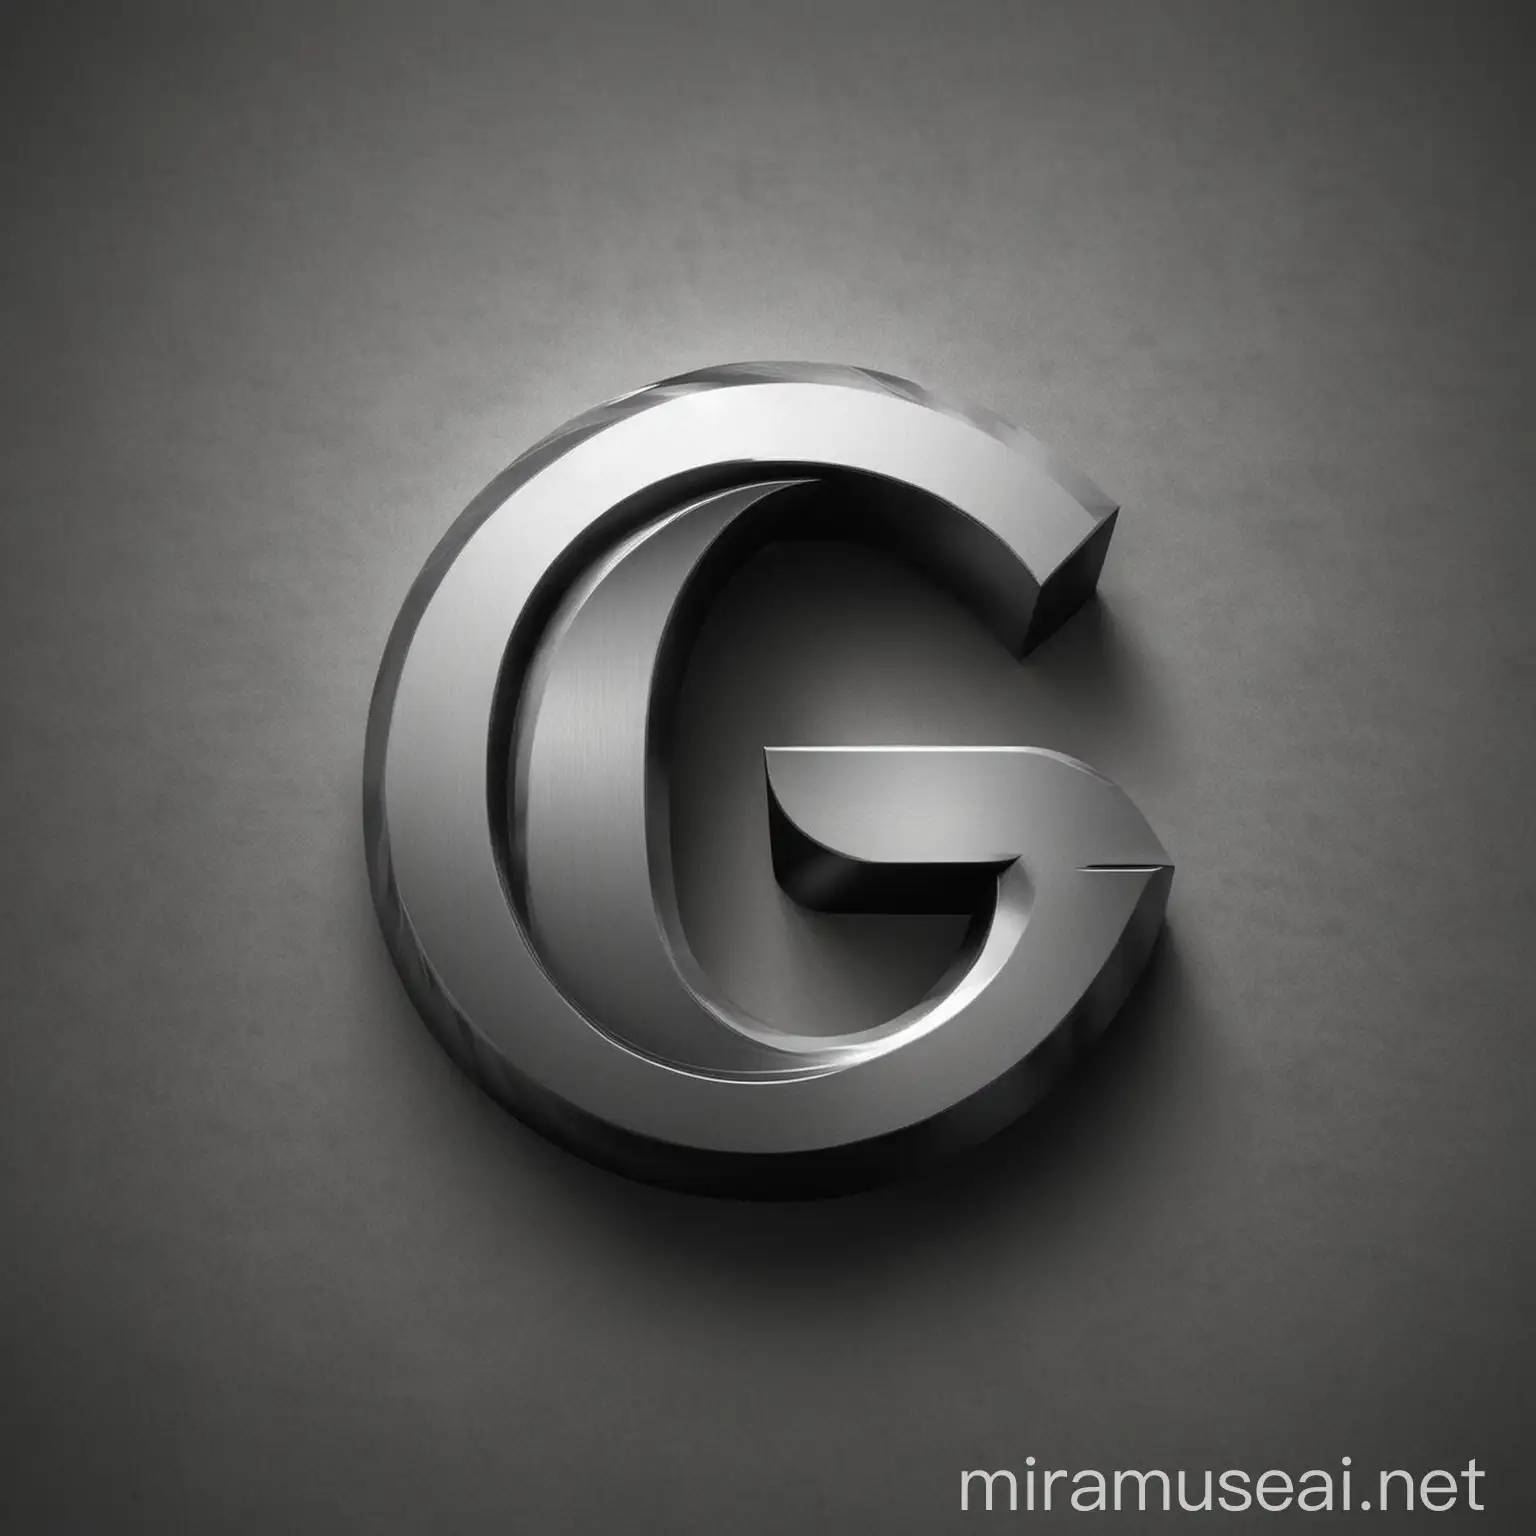 Create a greyscale logo with the letter capital G as main focus point. The overall image should breath IT and technology